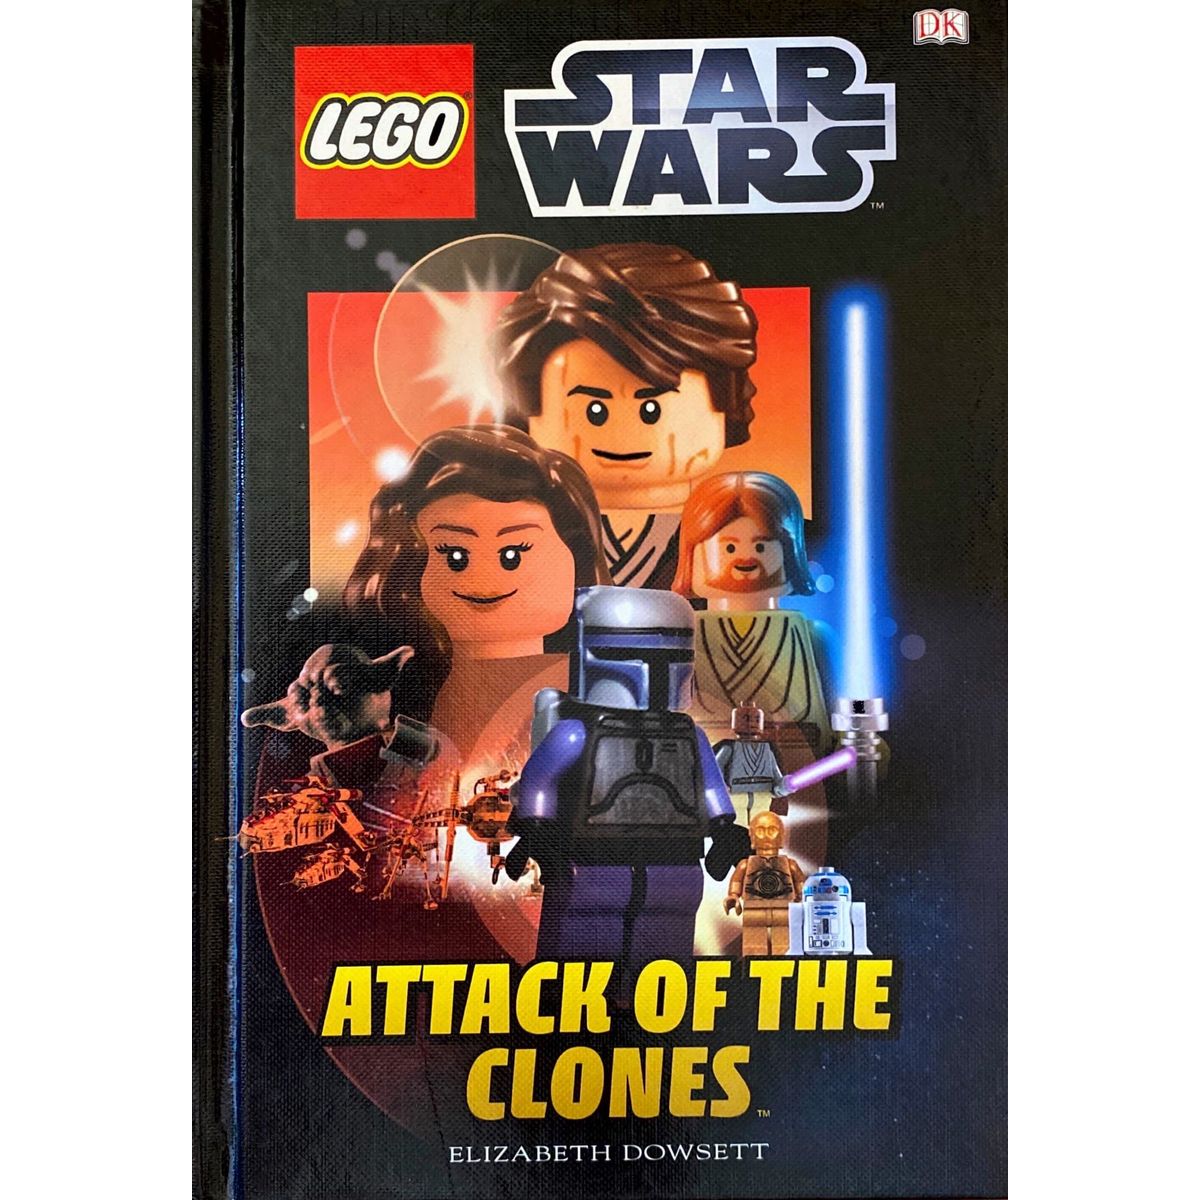 ISBN: 9781409334842 / 1409334848 - Lego Star Wars: Attack of the Clones by Dorling Kindersley [2013]